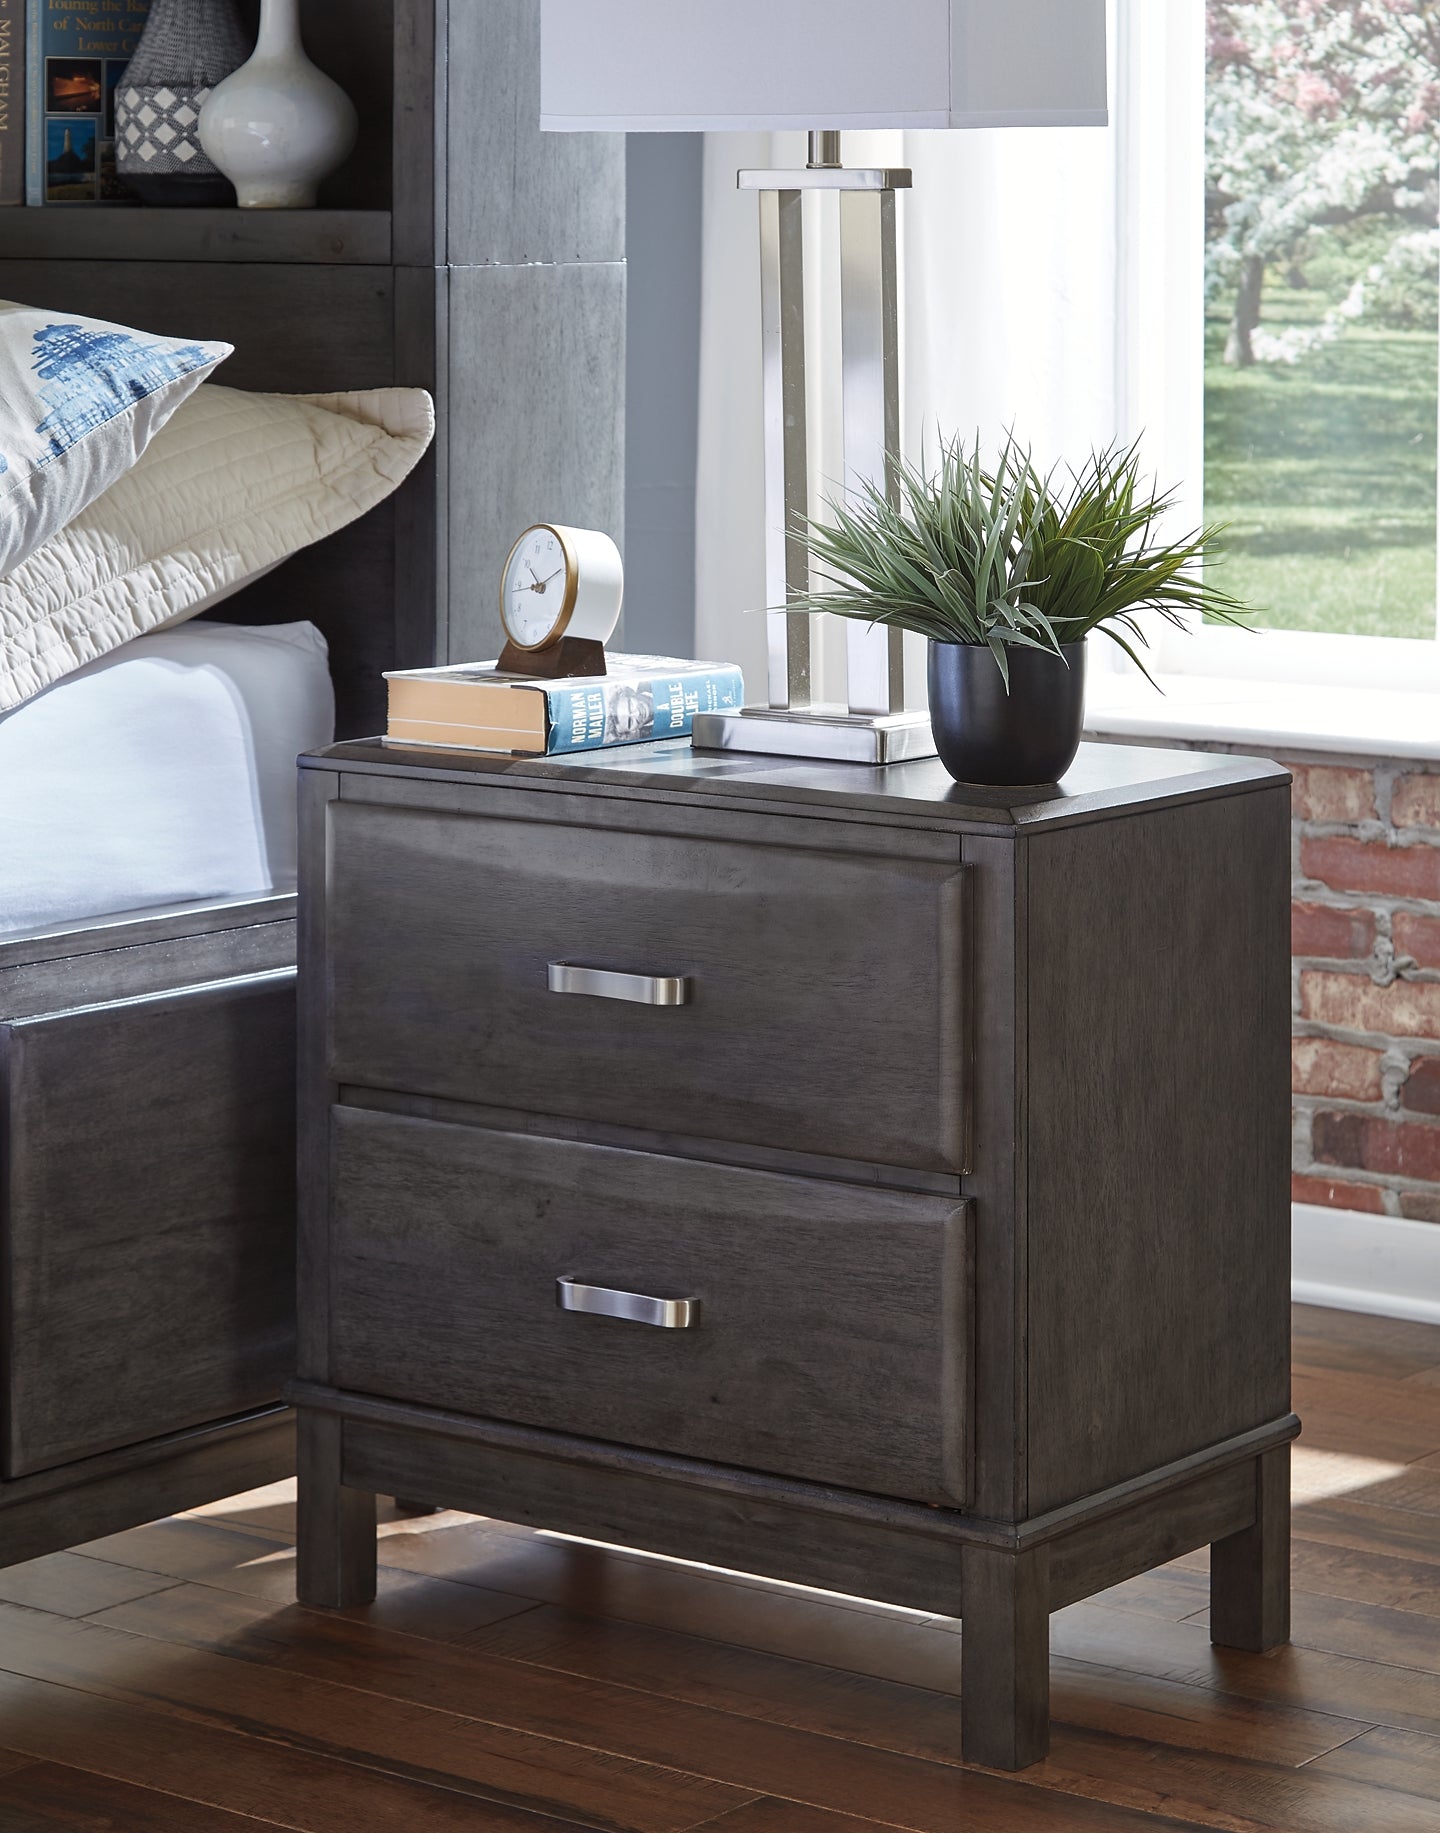 Caitbrook Two Drawer Night Stand